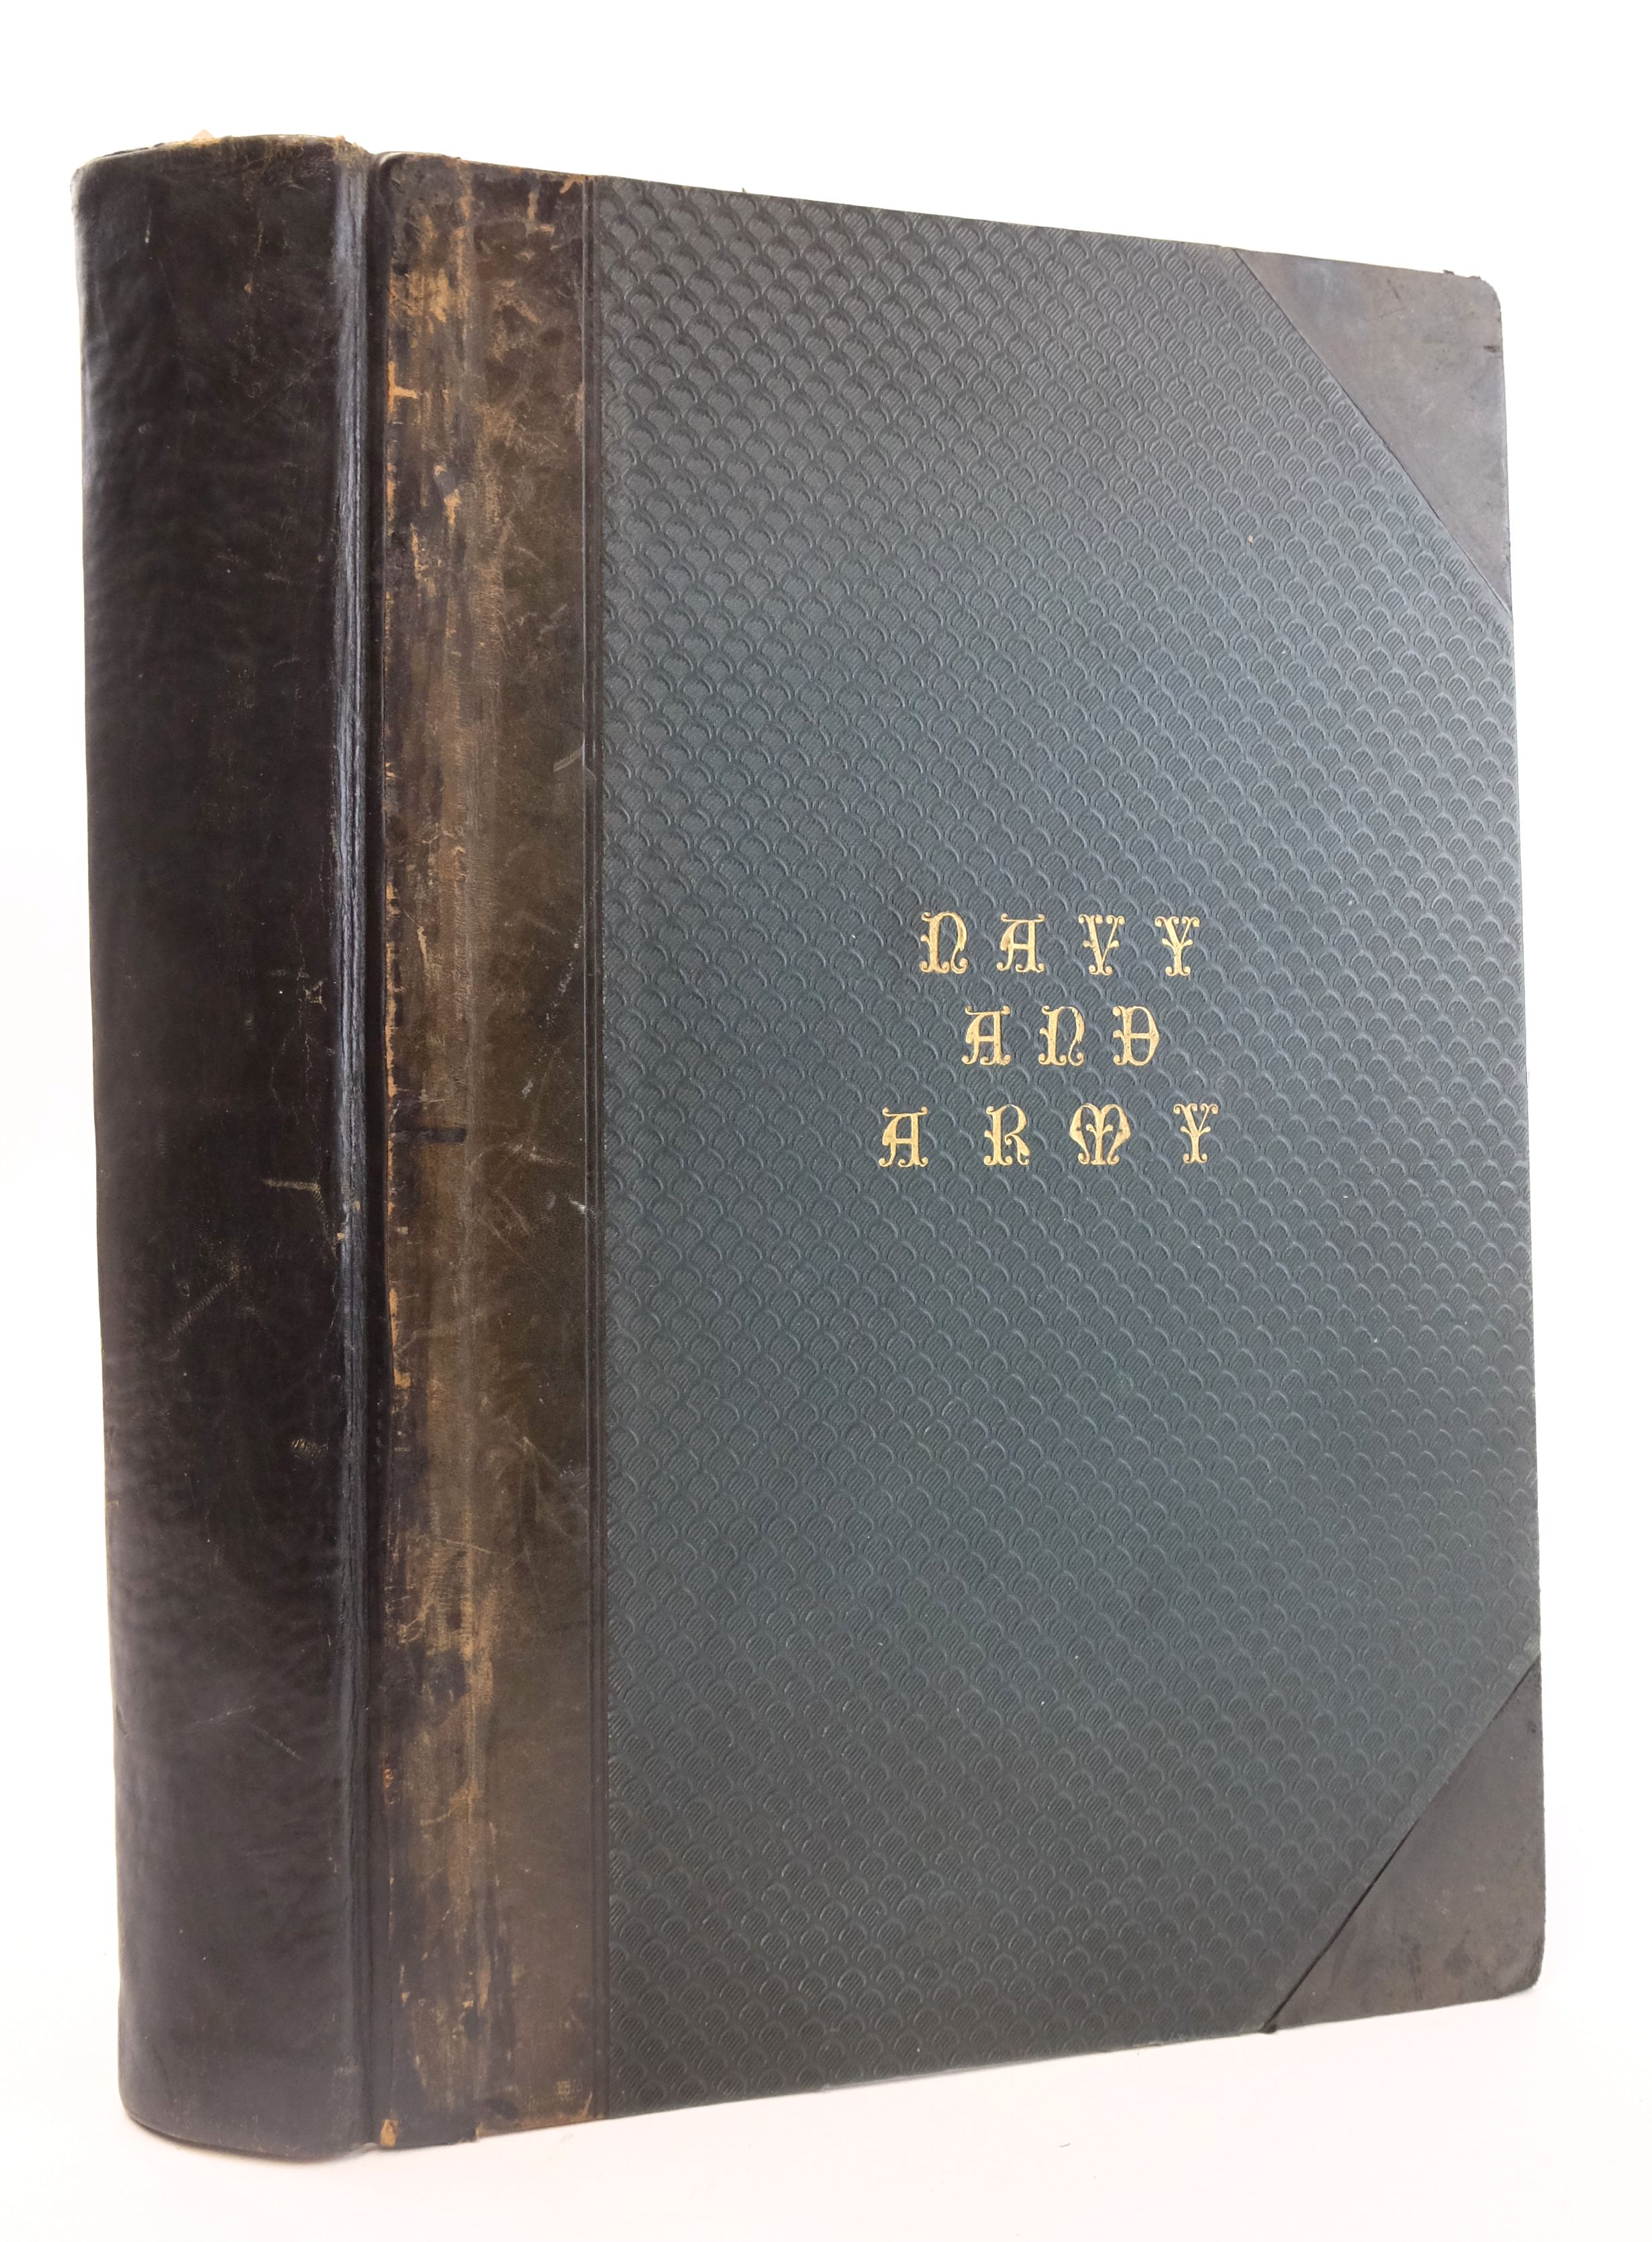 Photo of NAVY & ARMY ILLUSTRATED VOL. I & II- Stock Number: 1824289